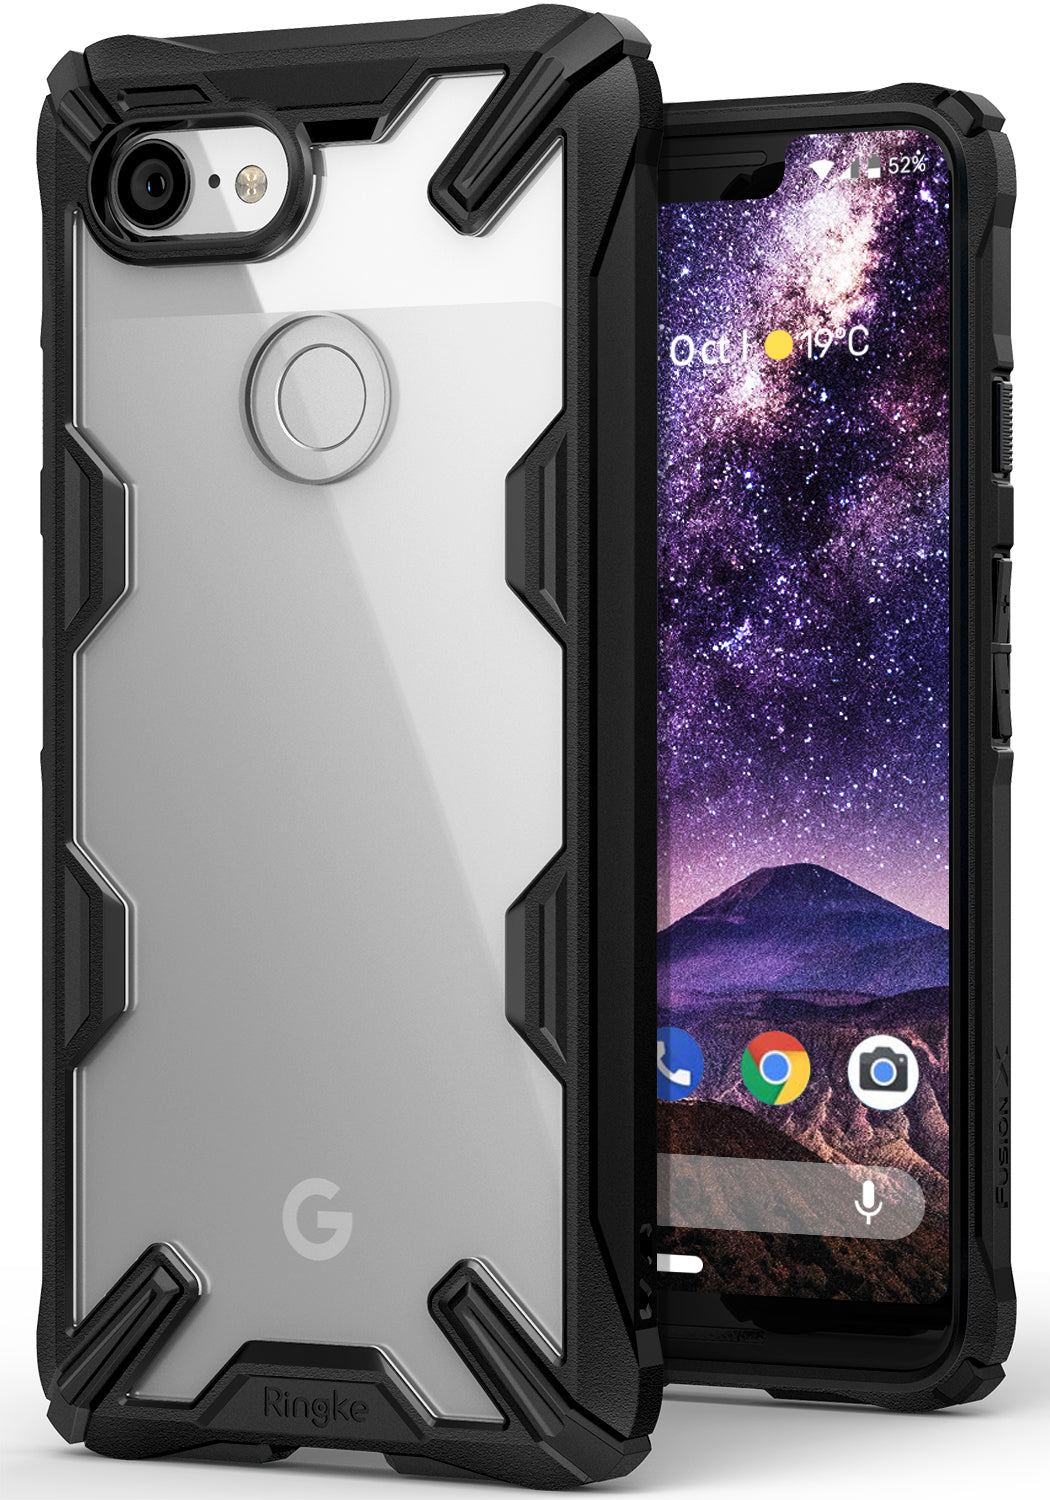 ringke fusion-x rugged heavy duty clear back case cover for google pixel 3 xl main black